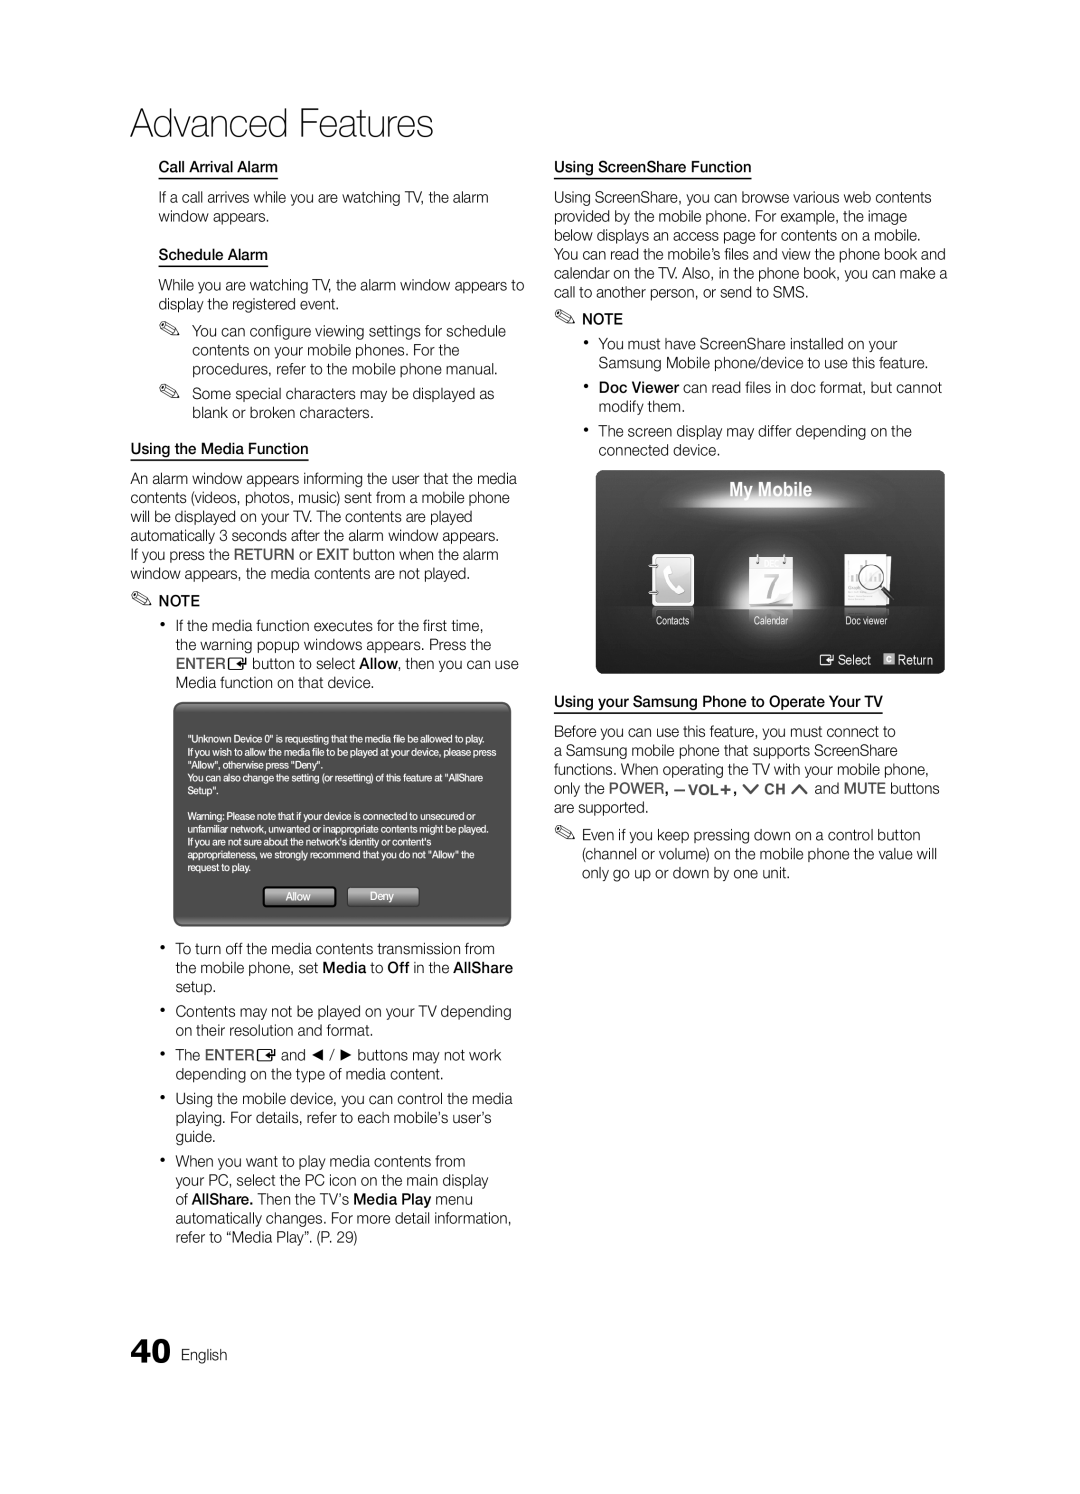 Samsung LN32C550 user manual My Mobile, Advanced Features 